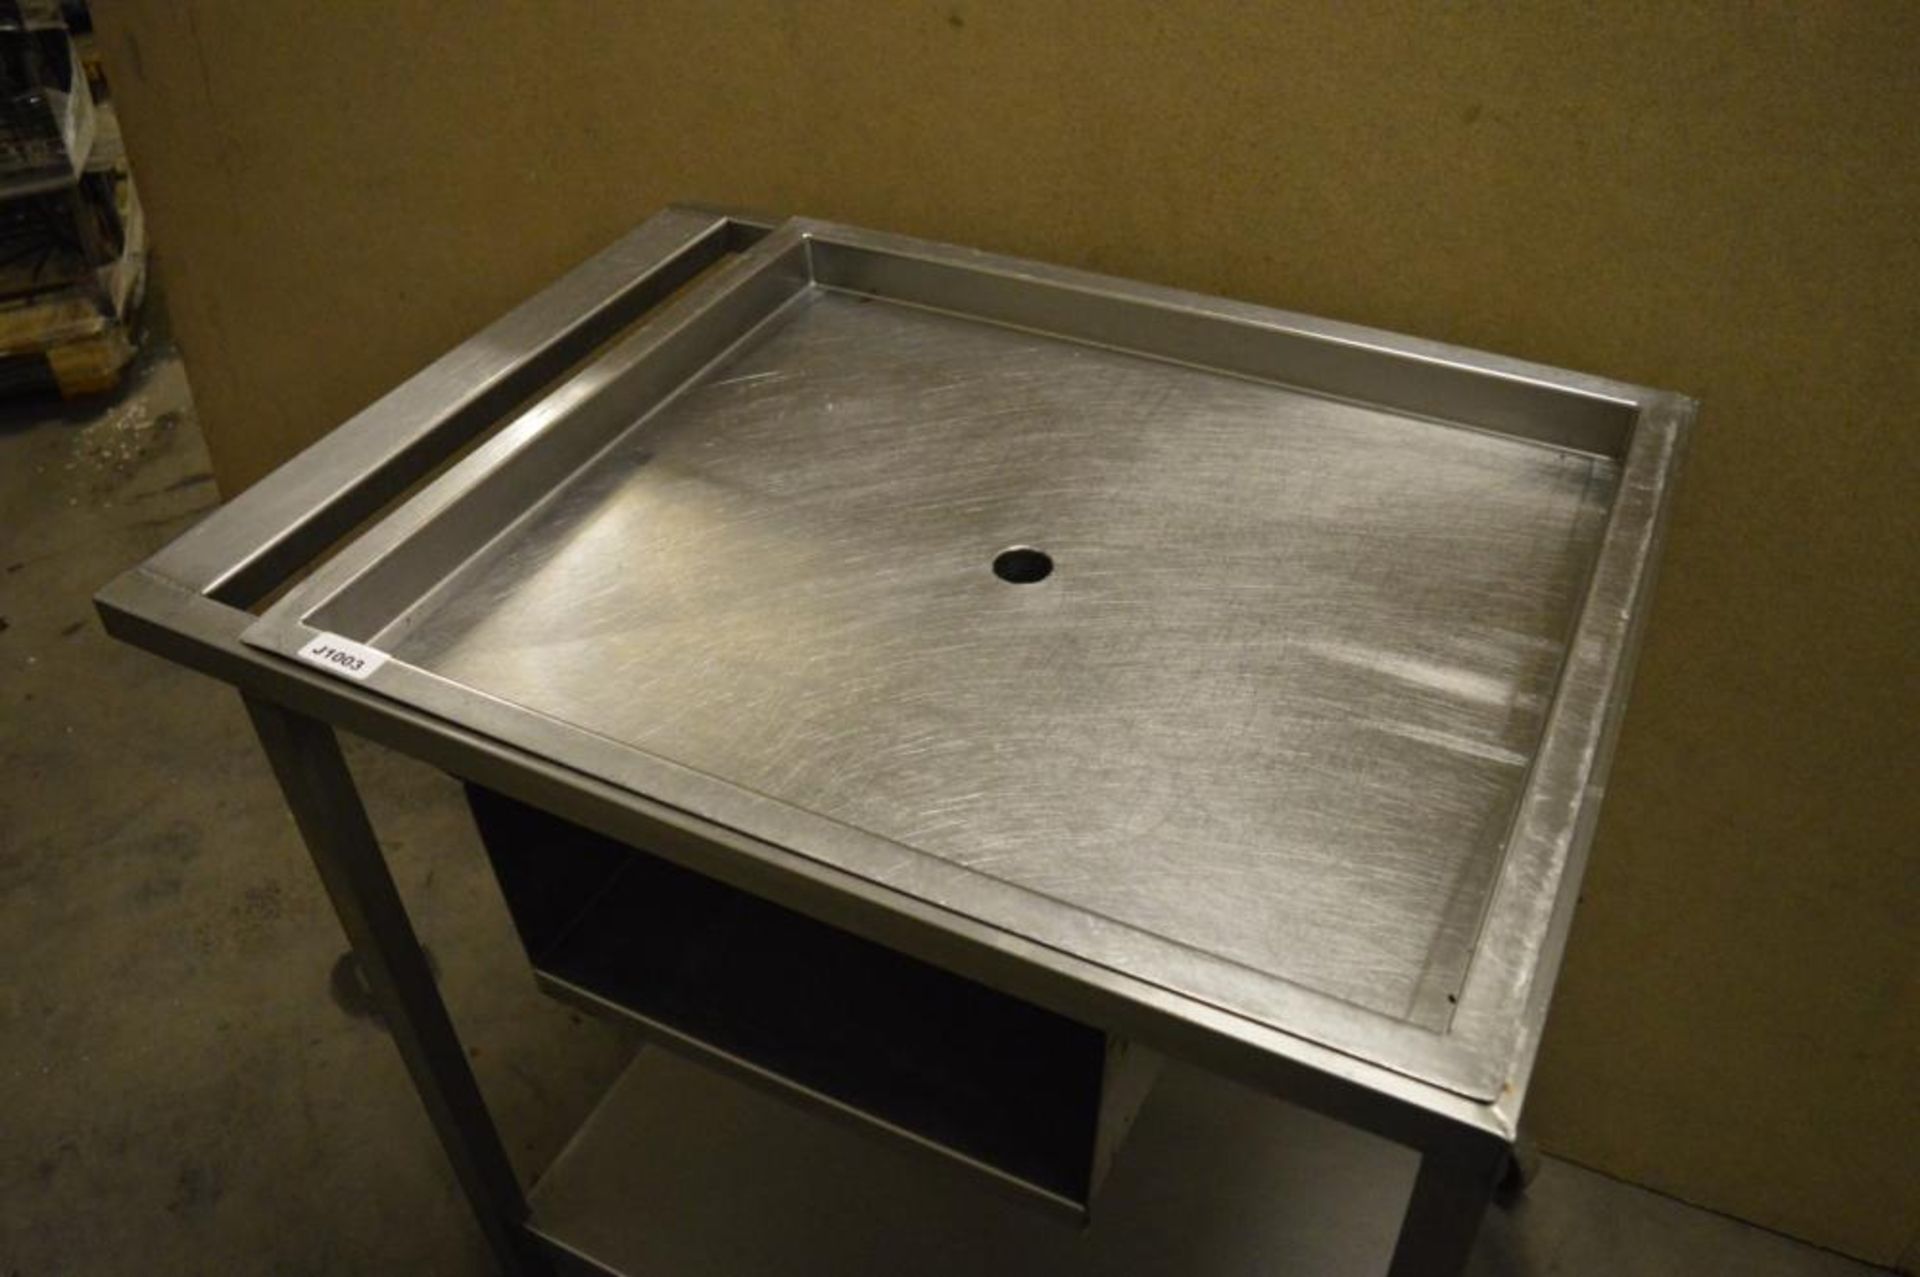 1 x Wheeled Stainless Steel Prep Bench with Drain Hole - Dimensions: 81.5 x 60.5 x 88cm - Ref: J1003 - Image 3 of 4